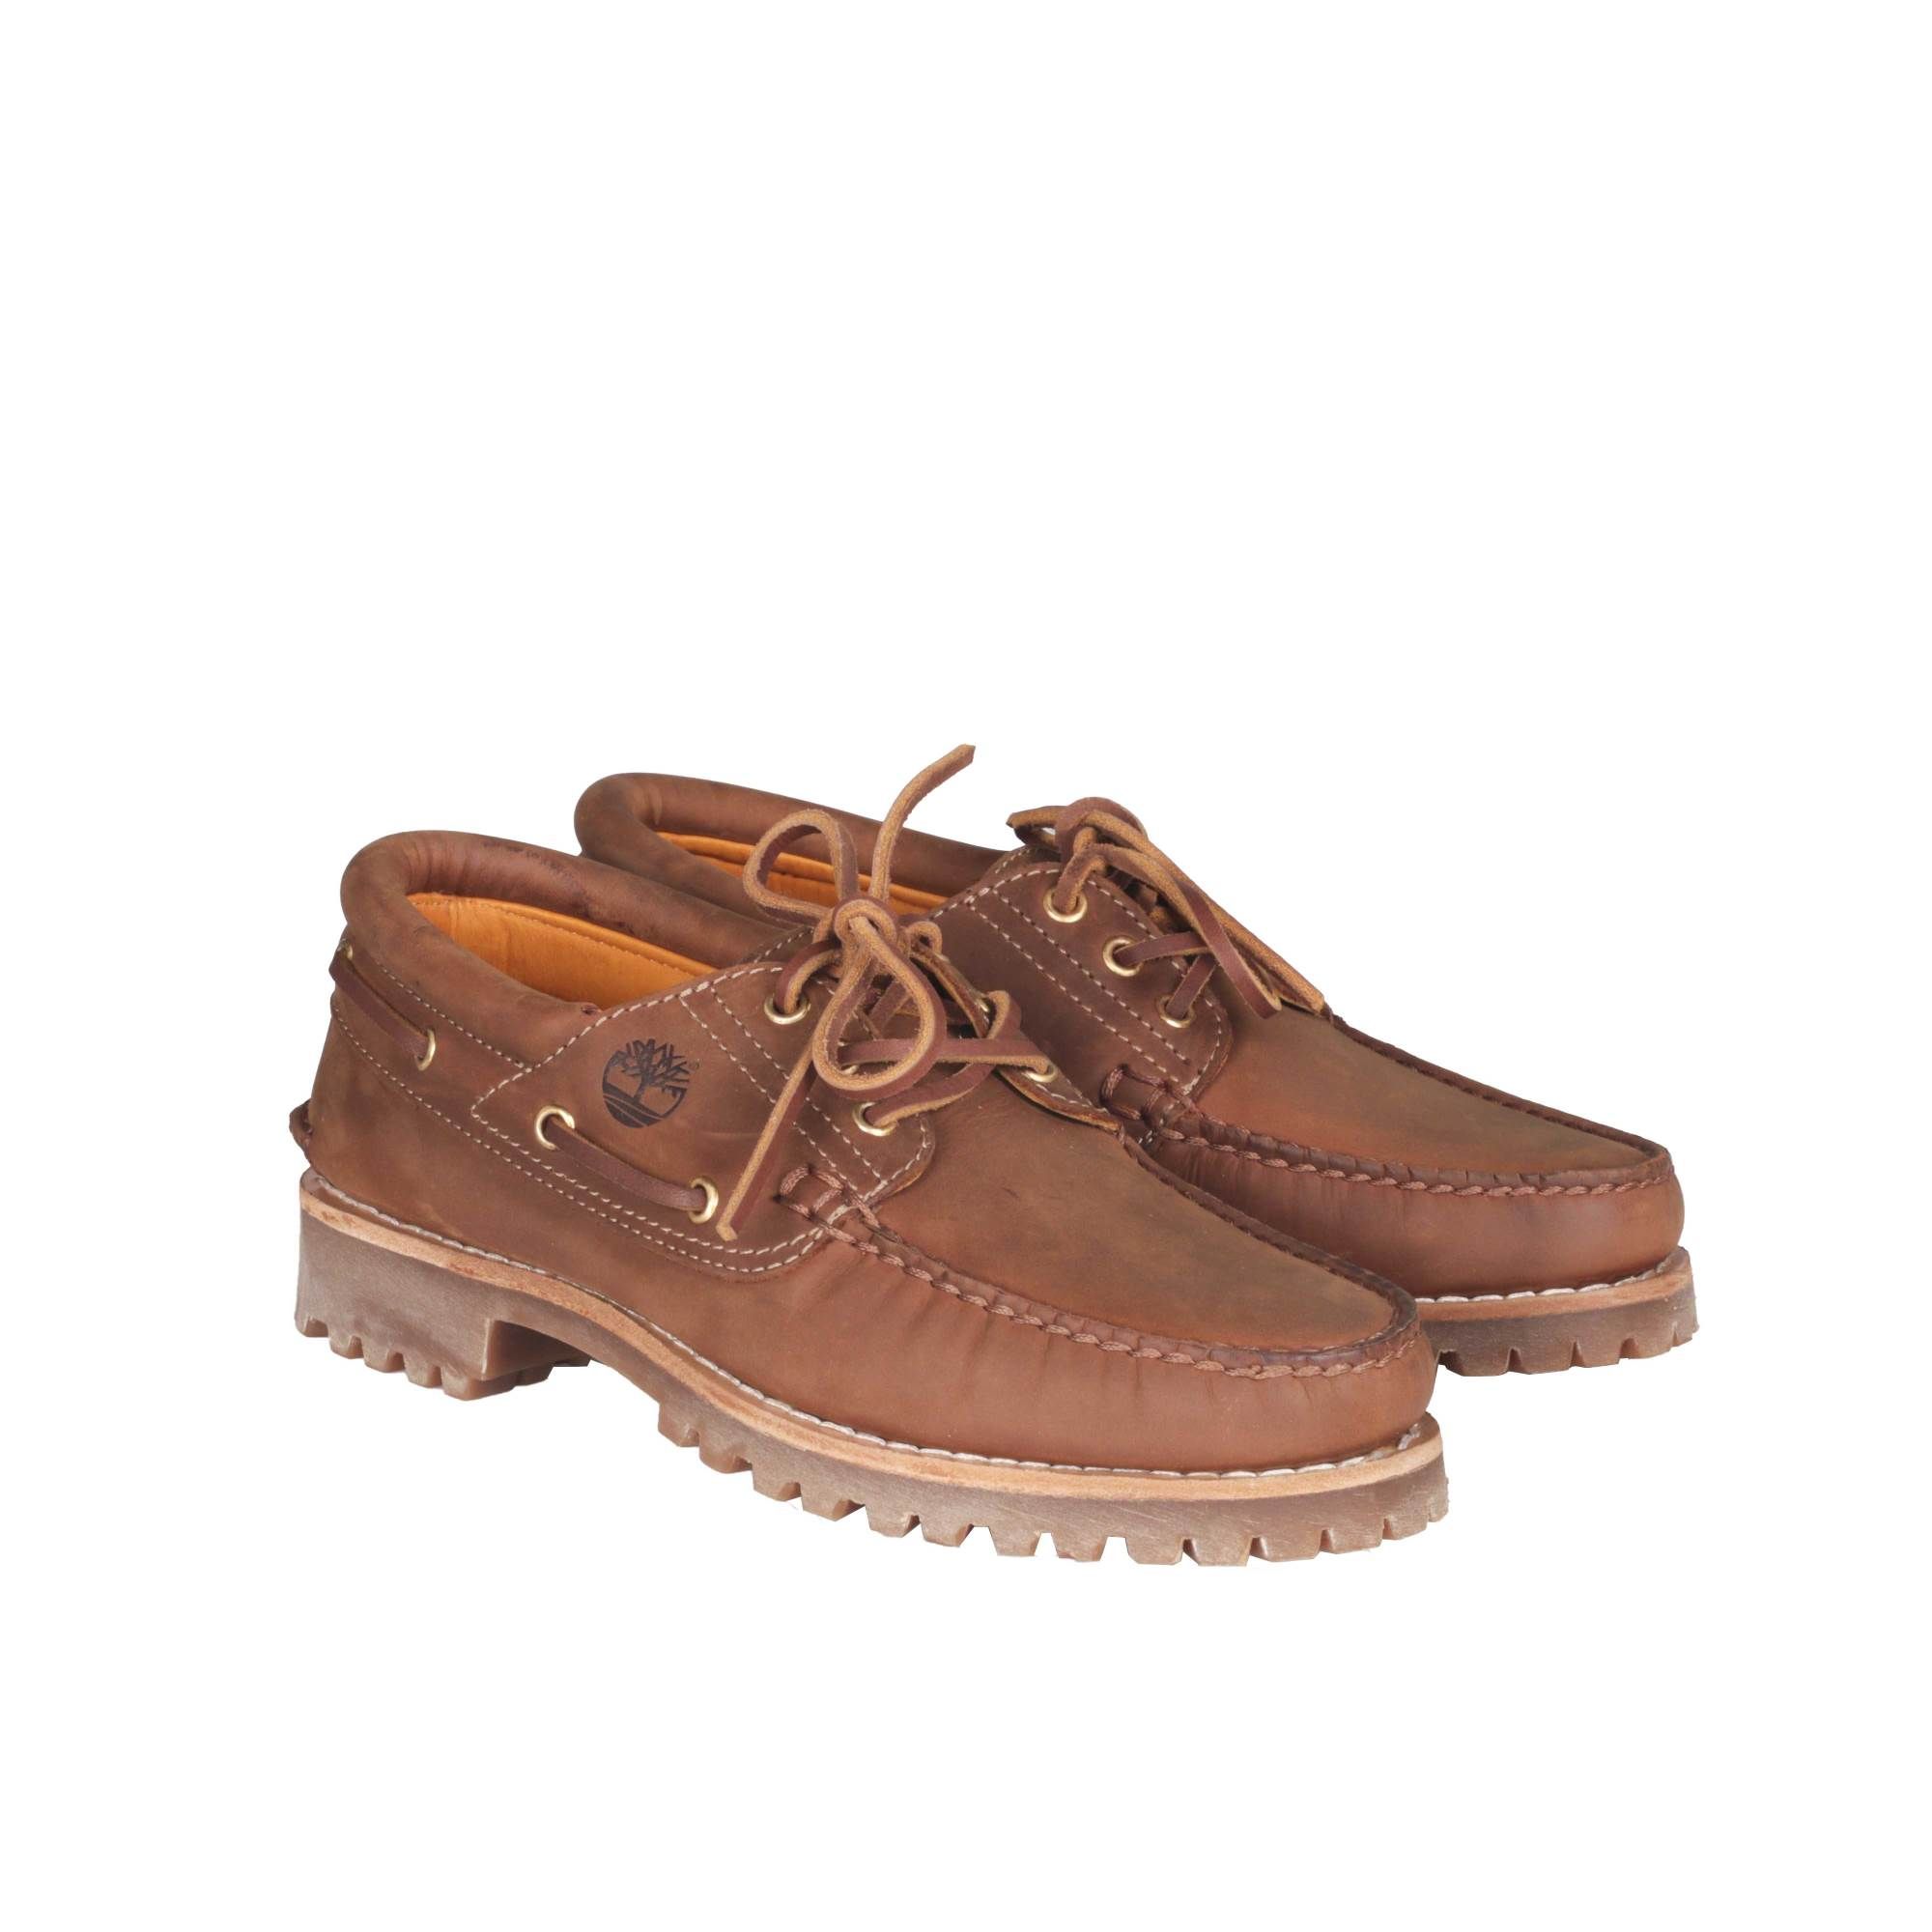 mate Motiveren Noord West TIMBERLAND Brown Leather Boat Shoes 3 Eye | IsuiT